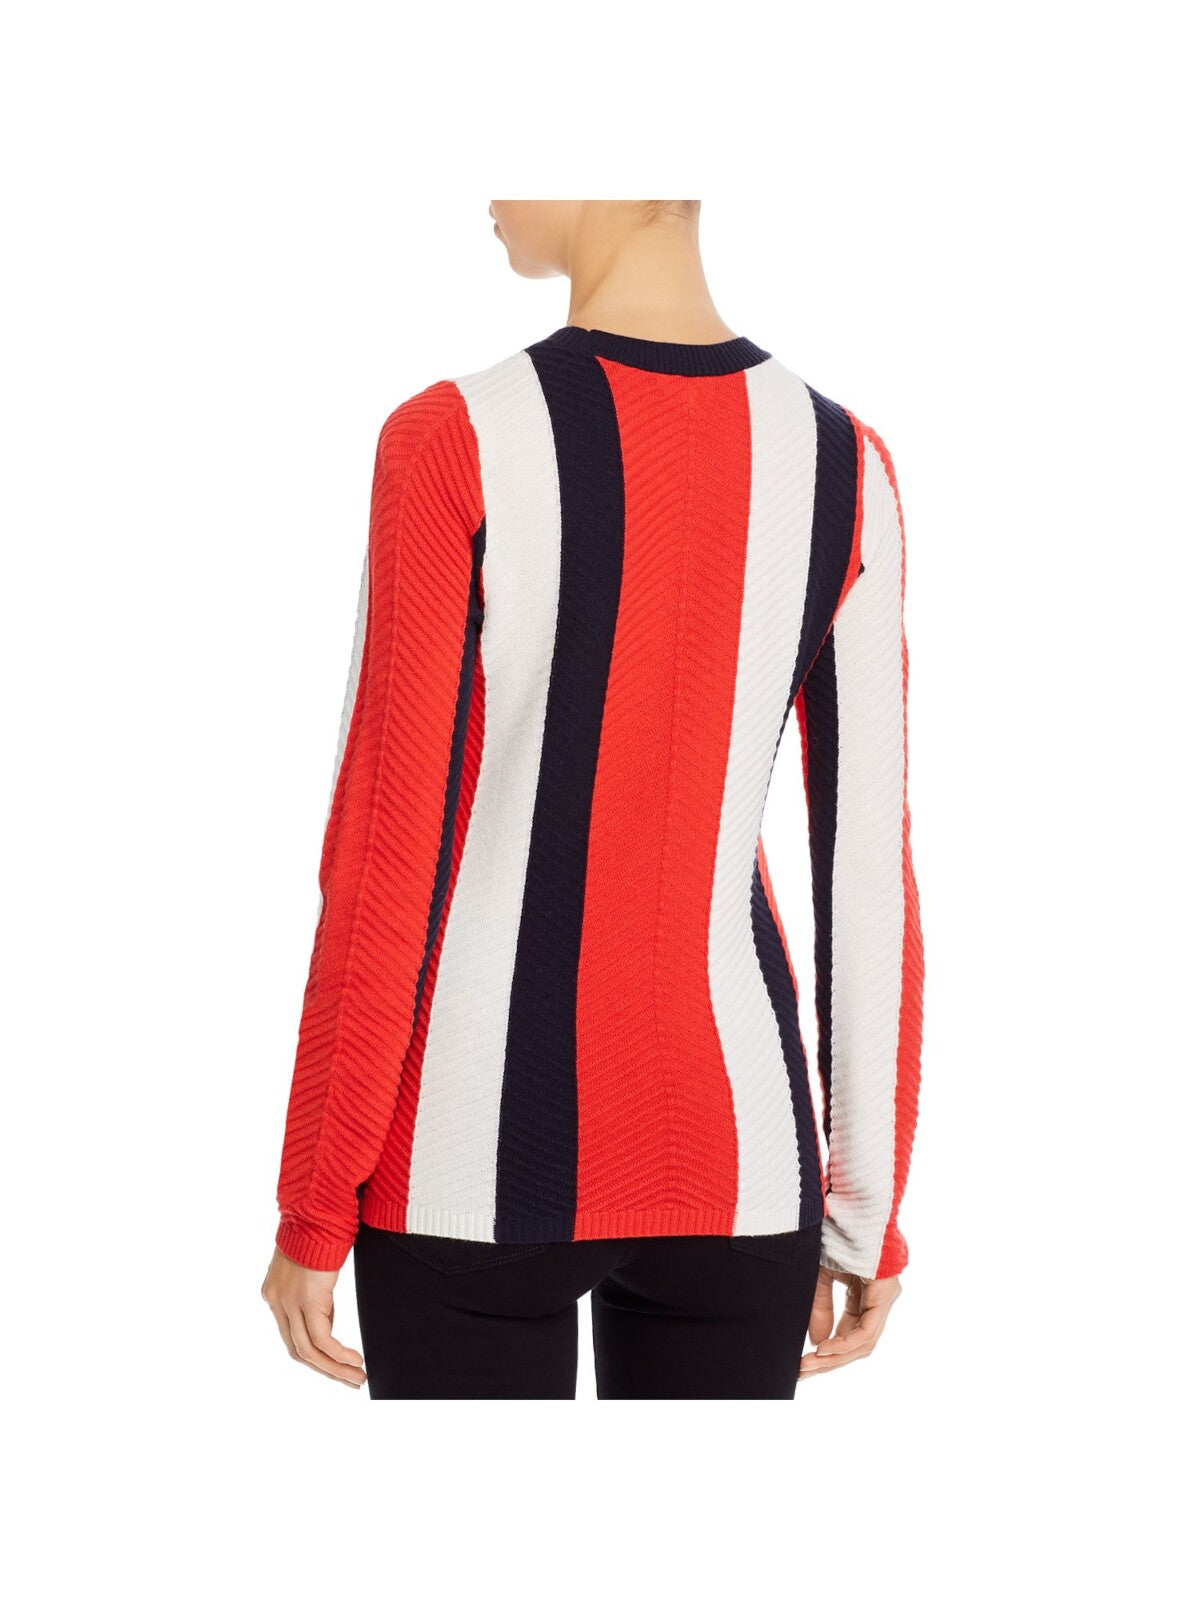 MINNIEROSE Womens Red Stretch Ribbed Striped Long Sleeve Crew Neck Sweater M